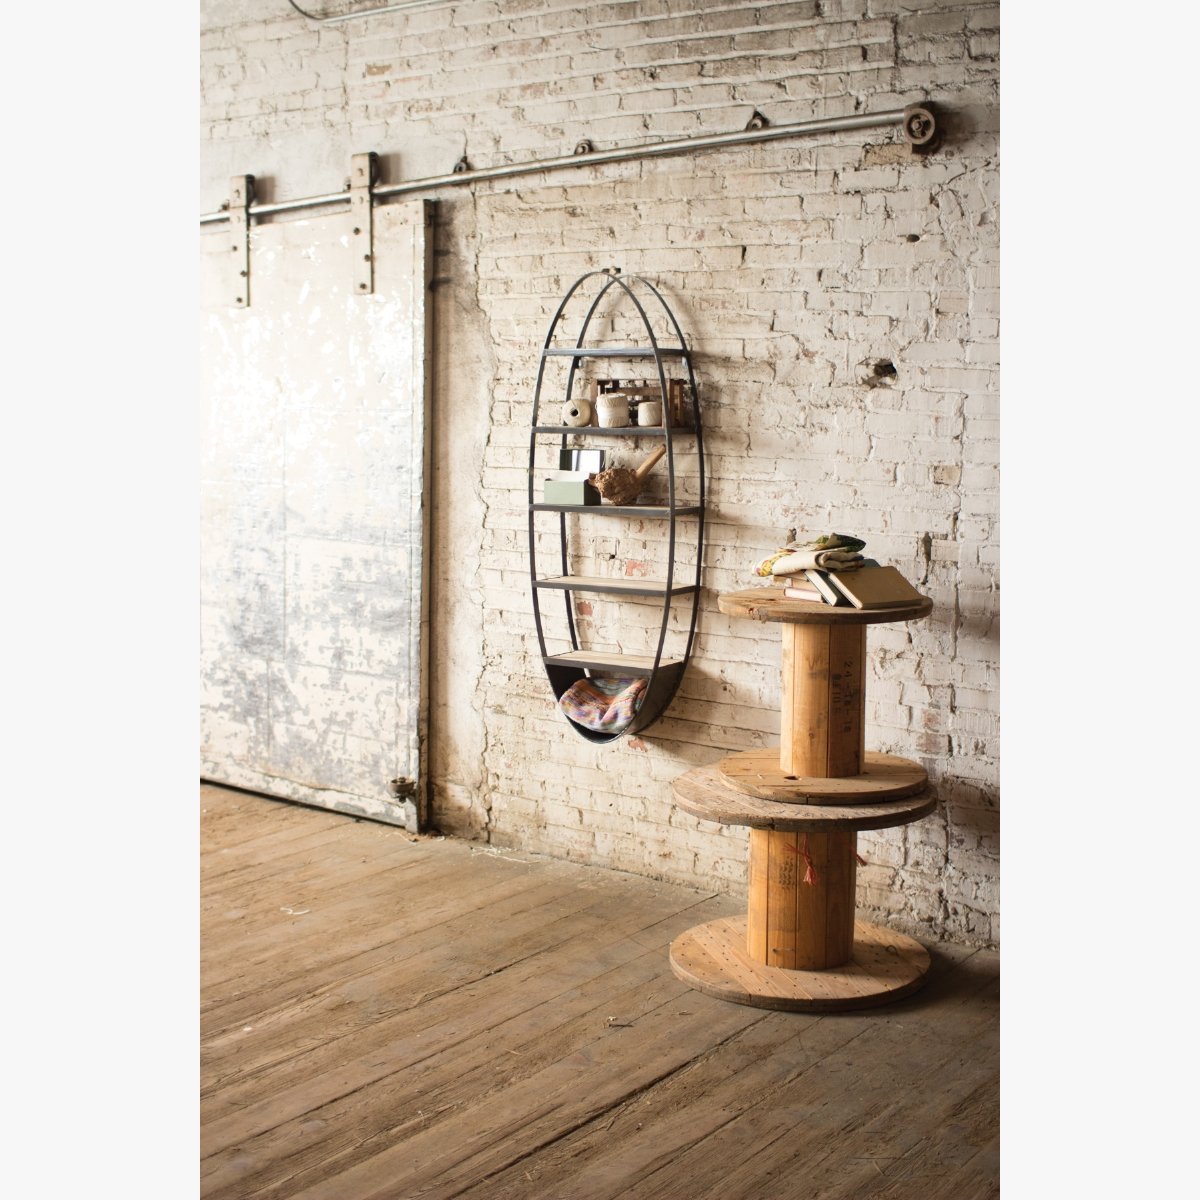 This has to be my favorite piece with SDH.  I can see it in so many different rooms of my home.   Check it out at 99DecorandMore.com 

#wallshelf #industrial #WAHM #sharingmylove #decor #interiordesign #furniture #sahm #affiliate #metal #shelving #industrialchic #multiUse